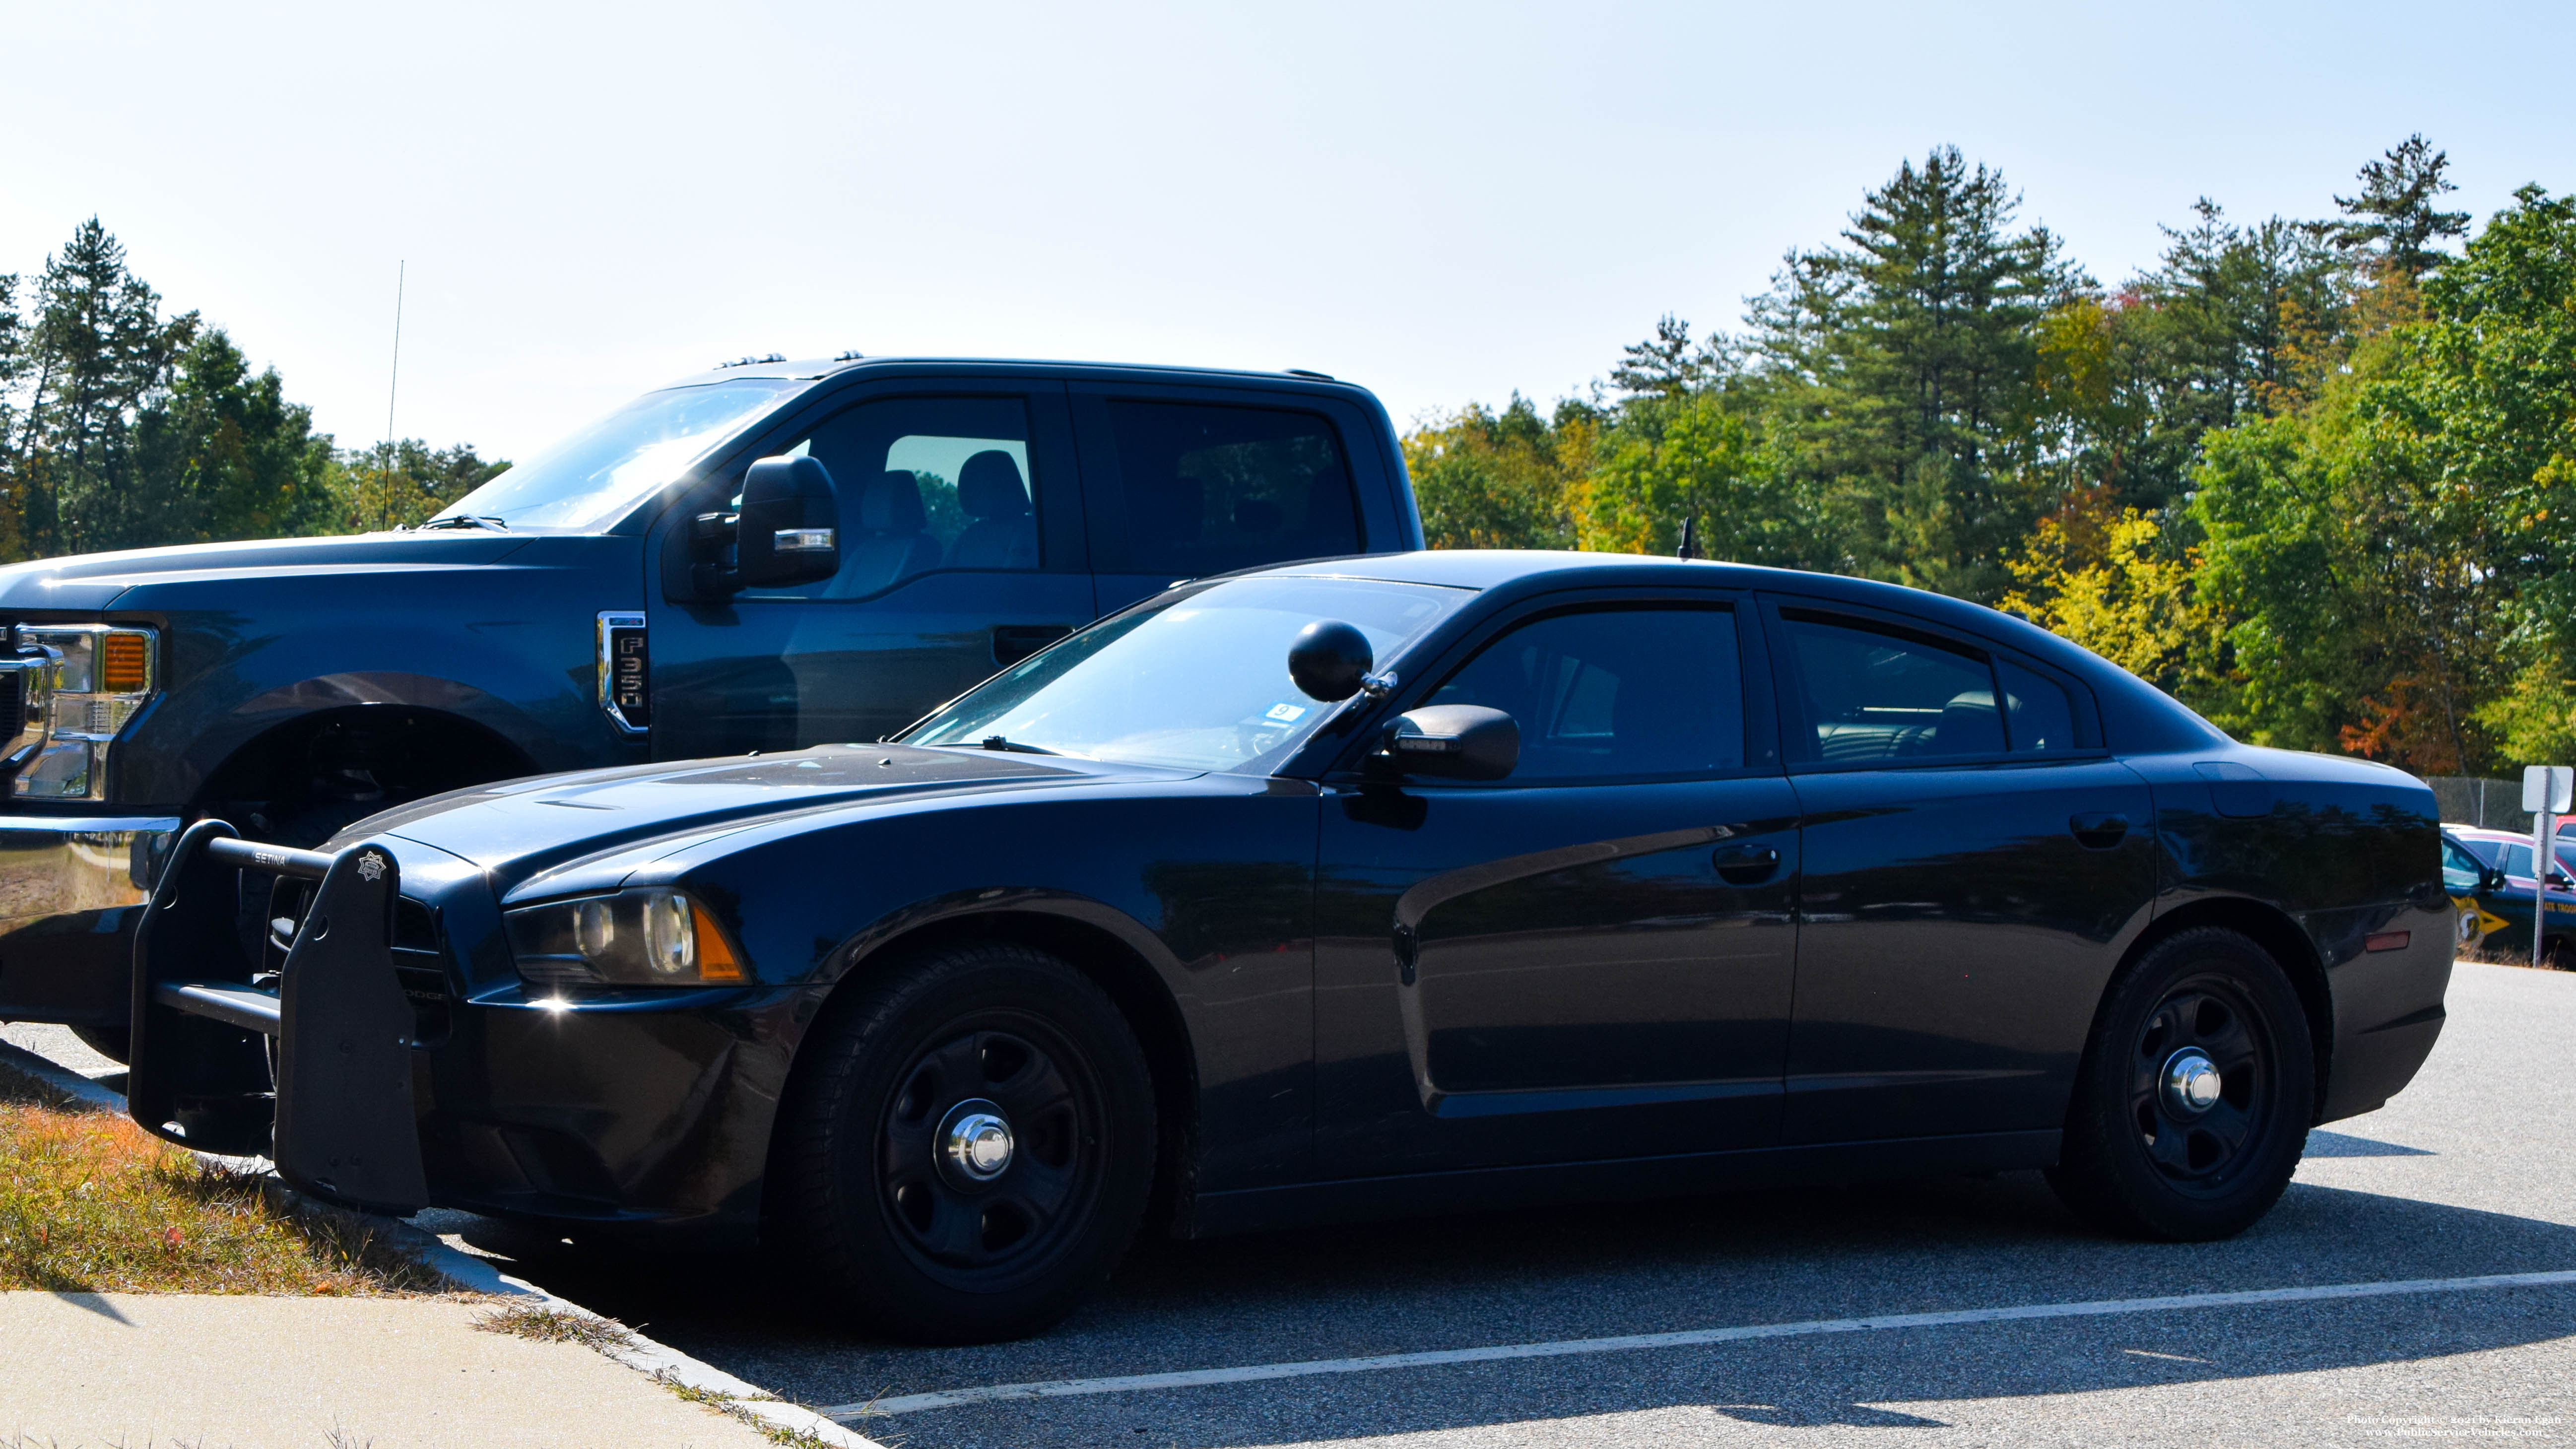 A photo  of New Hampshire State Police
            Cruiser 752, a 2011-2013 Dodge Charger             taken by Kieran Egan